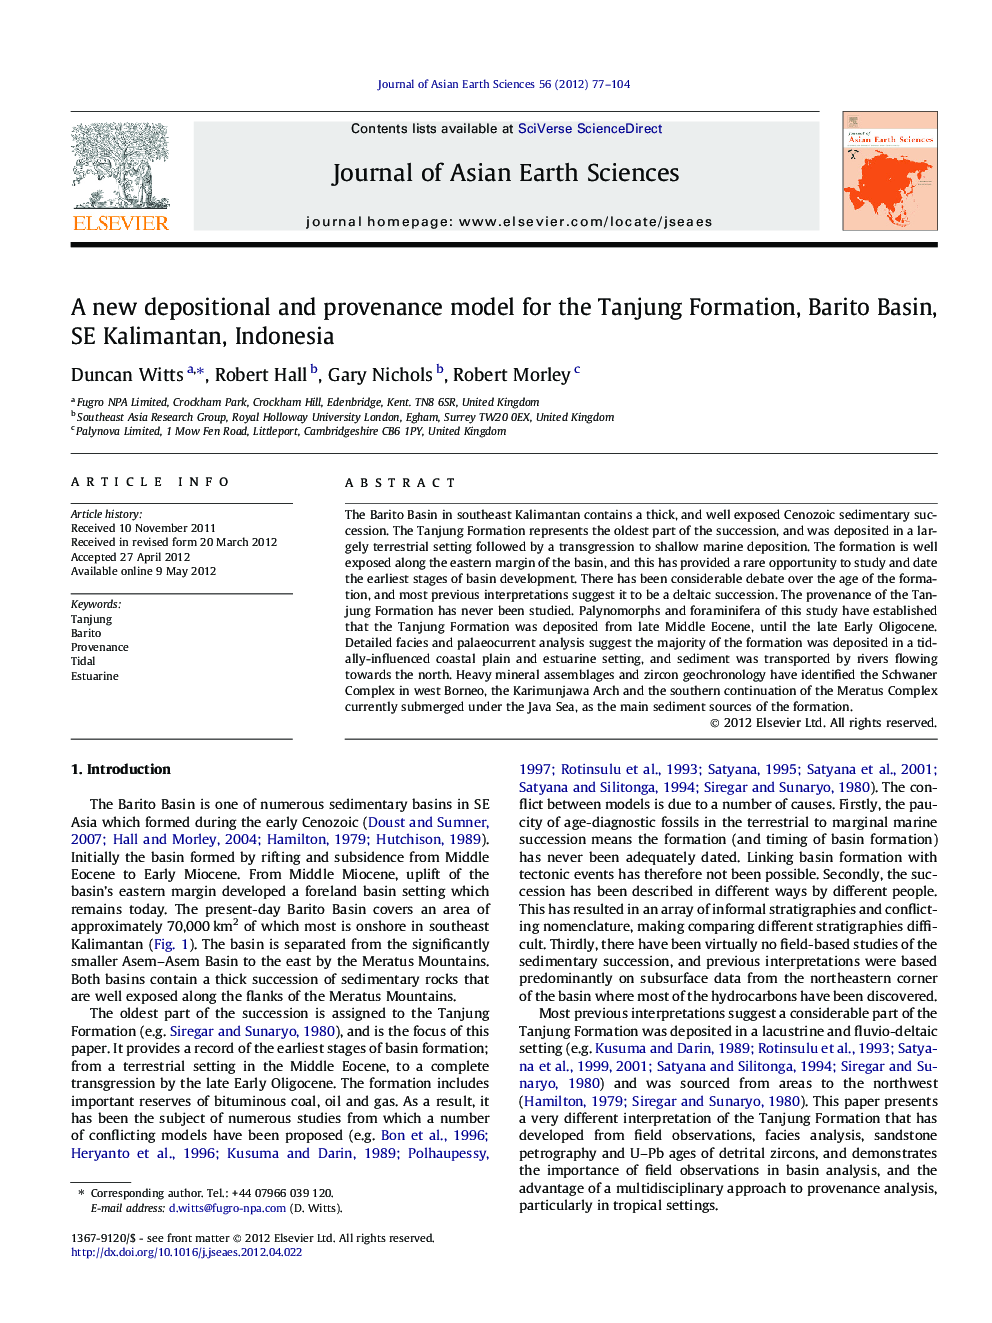 A new depositional and provenance model for the Tanjung Formation, Barito Basin, SE Kalimantan, Indonesia